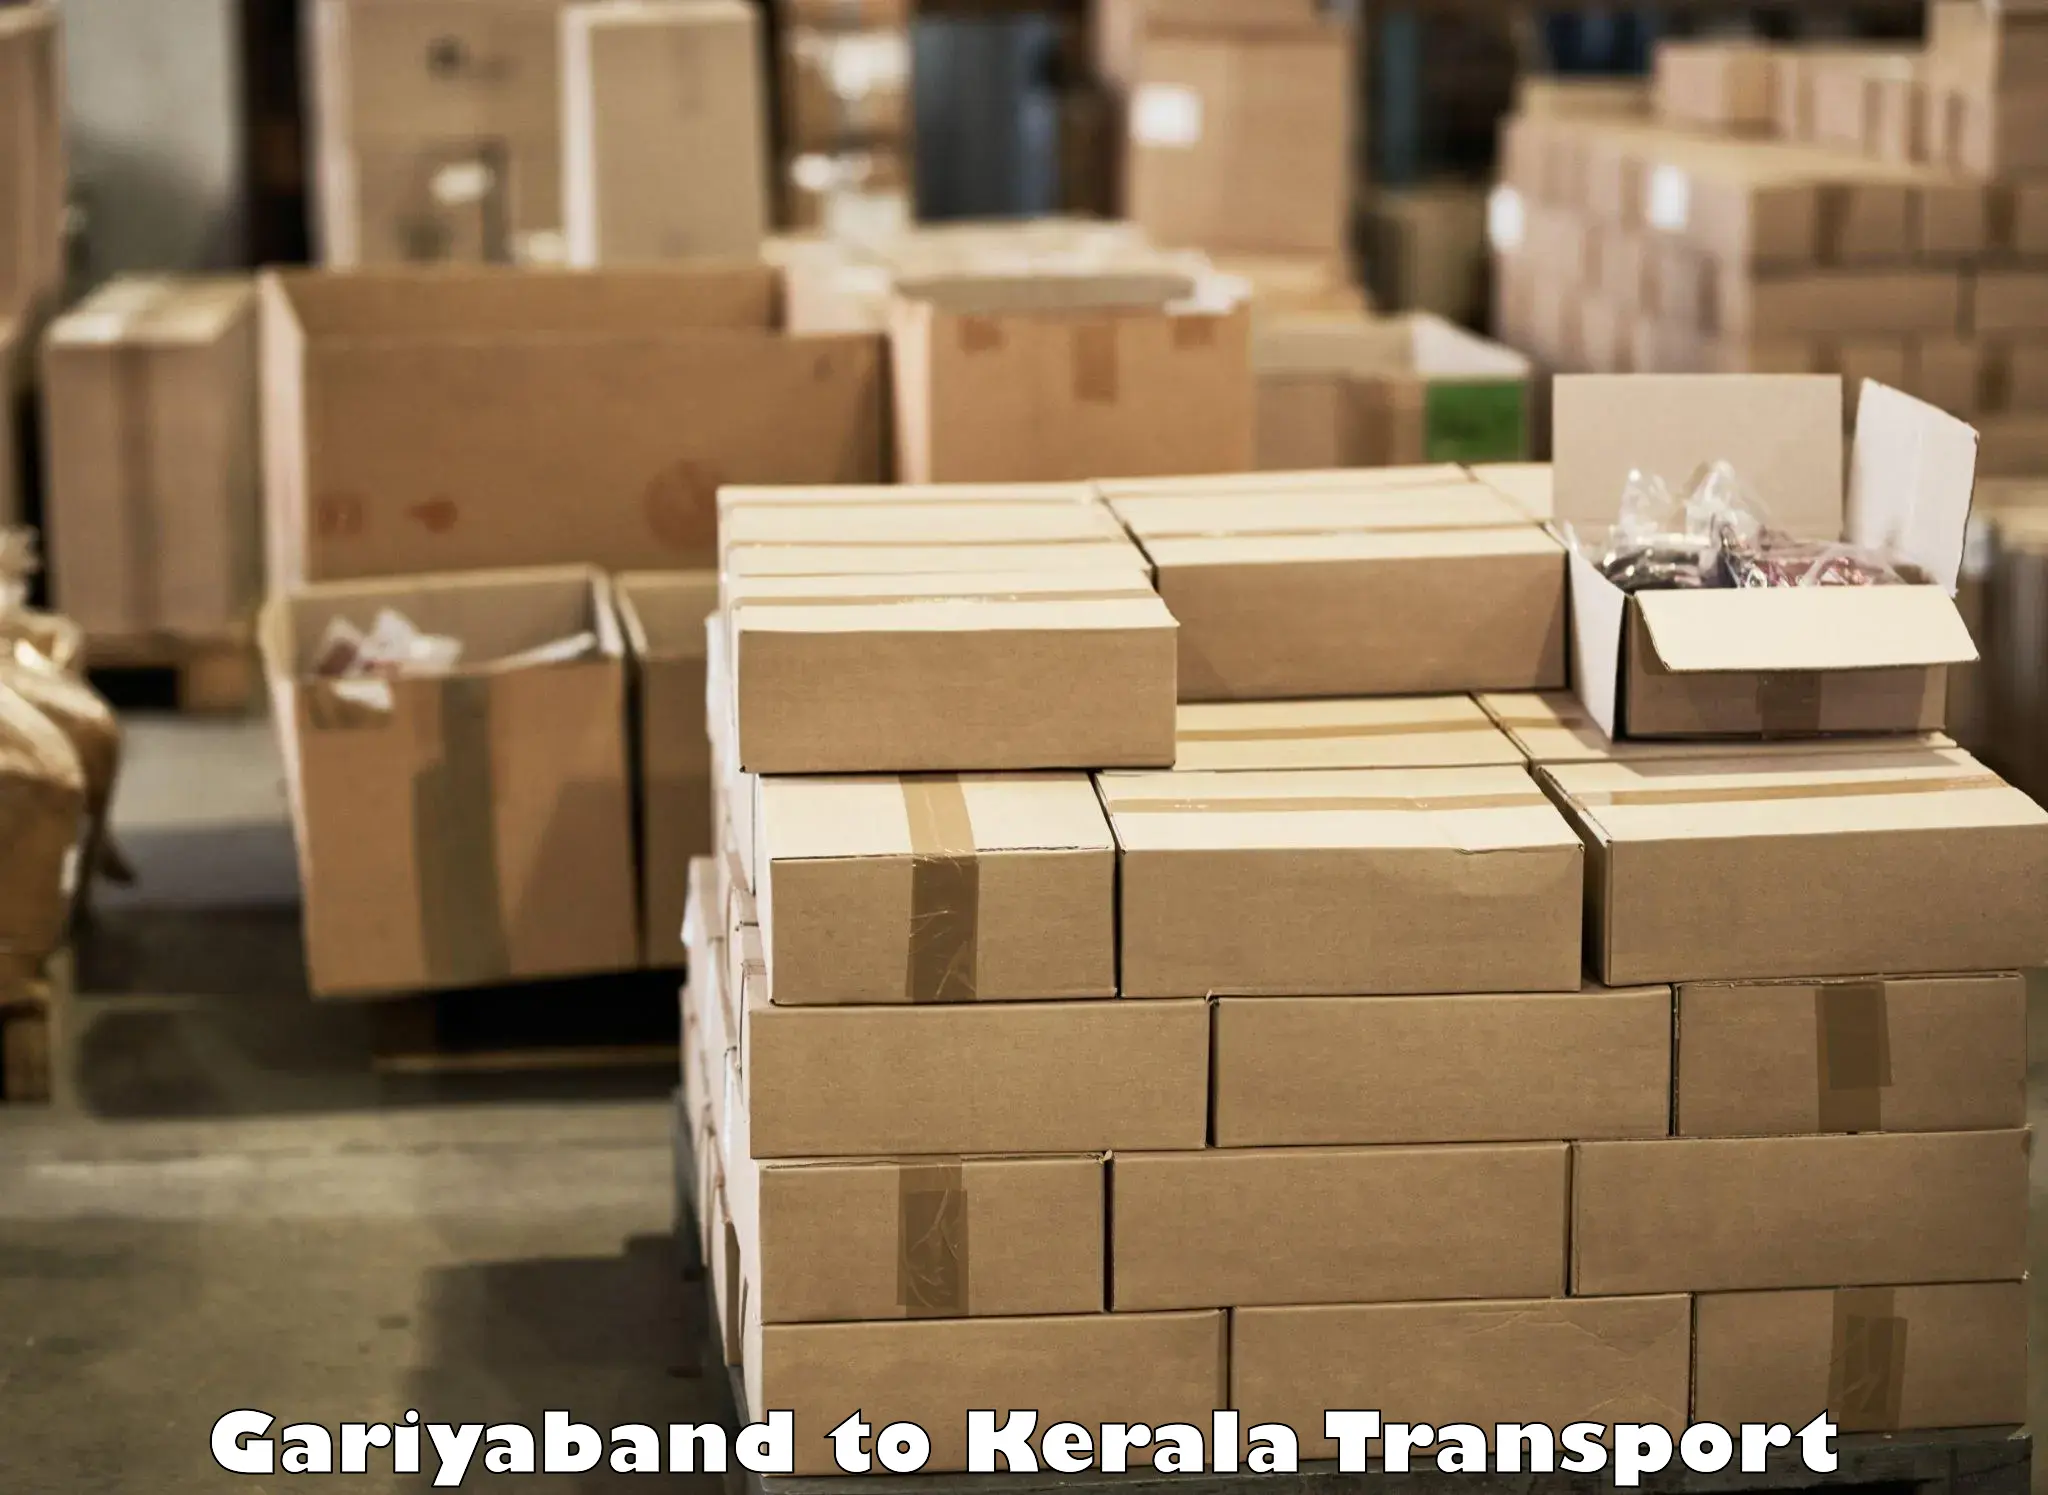 Door to door transport services Gariyaband to Cochin University of Science and Technology